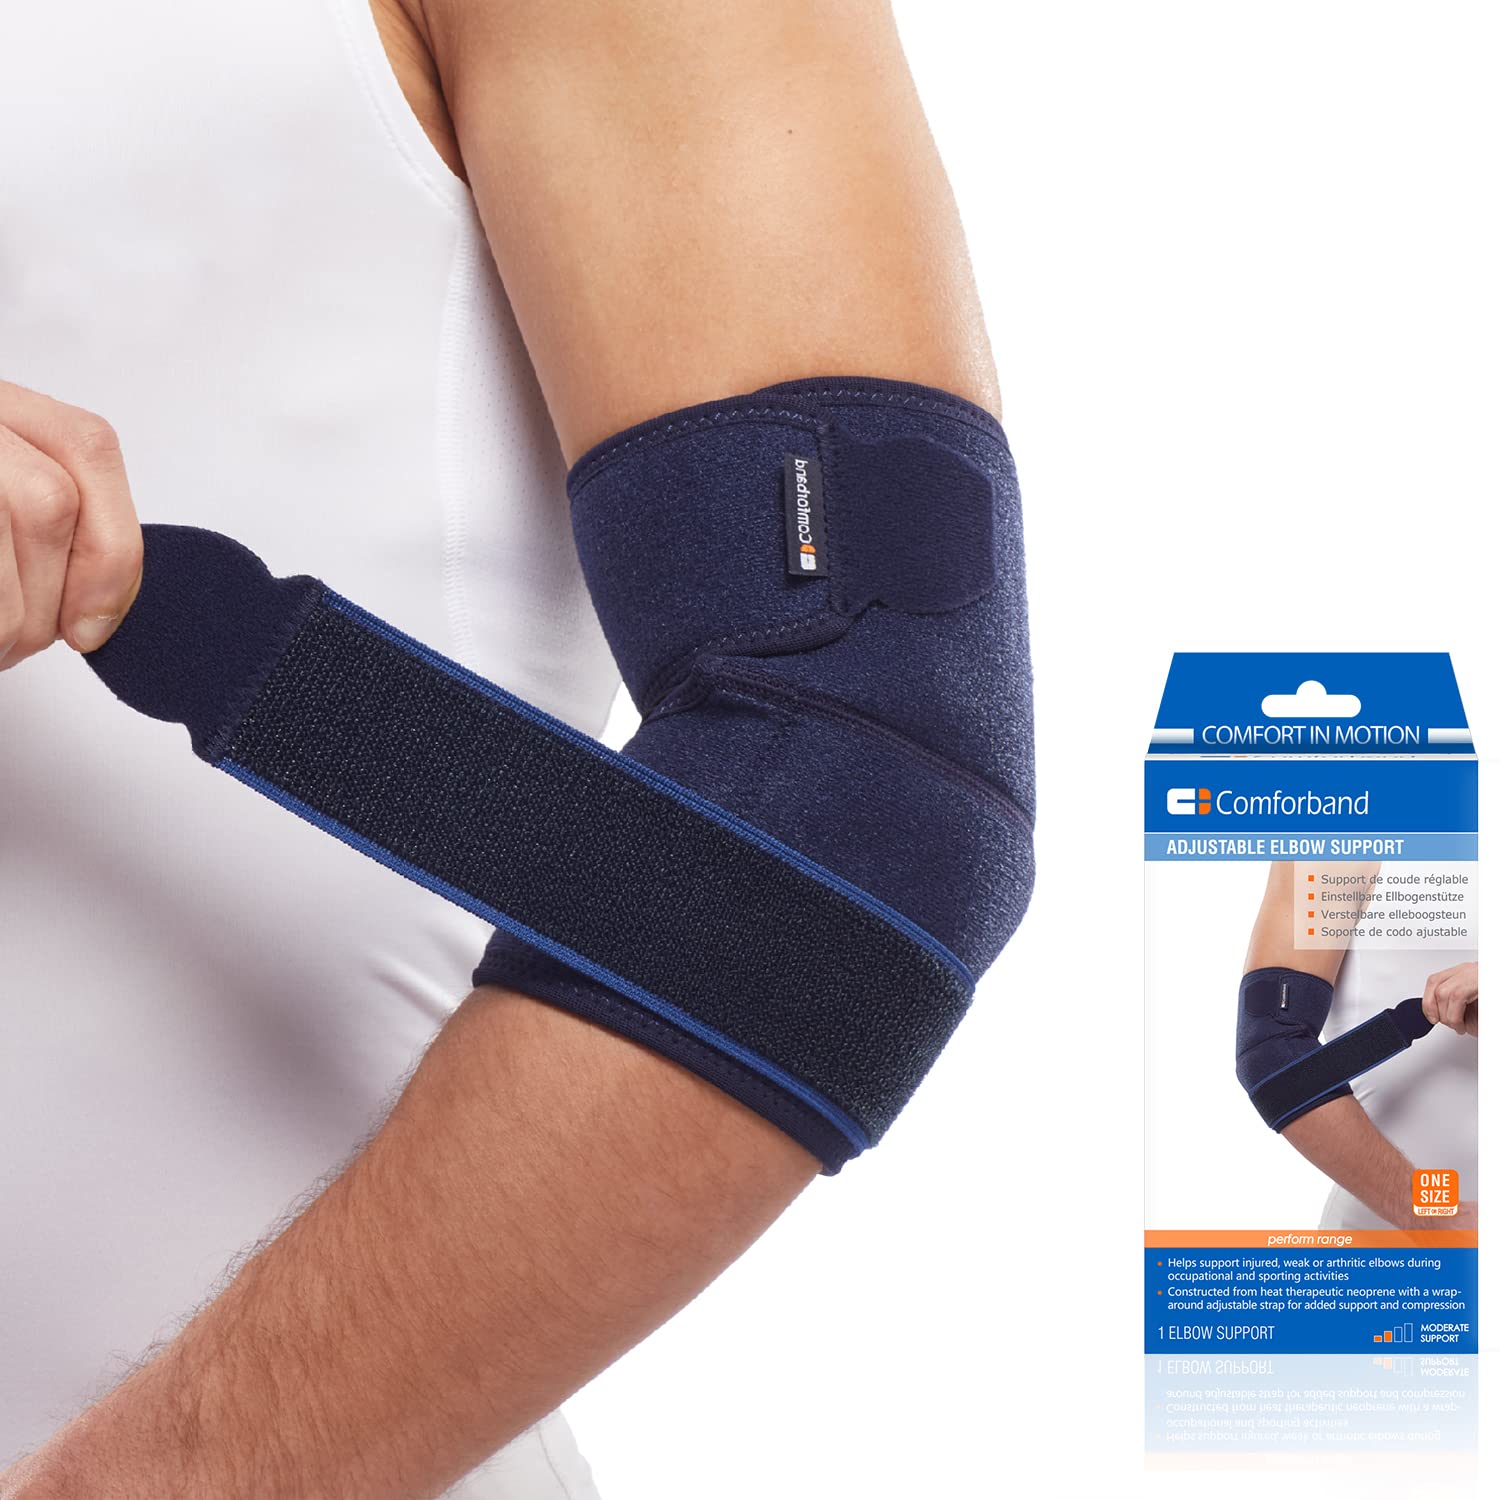 Comforband Adjustable Elbow Support for Epicondylitis, Tennis Elbow, Golfer’s Elbow, Bursitis, Elbow Sprains, Strains, Tendonitis, Arthritis, Sports Injury Recovery - Elbow Pain Relief - One Size fits Most